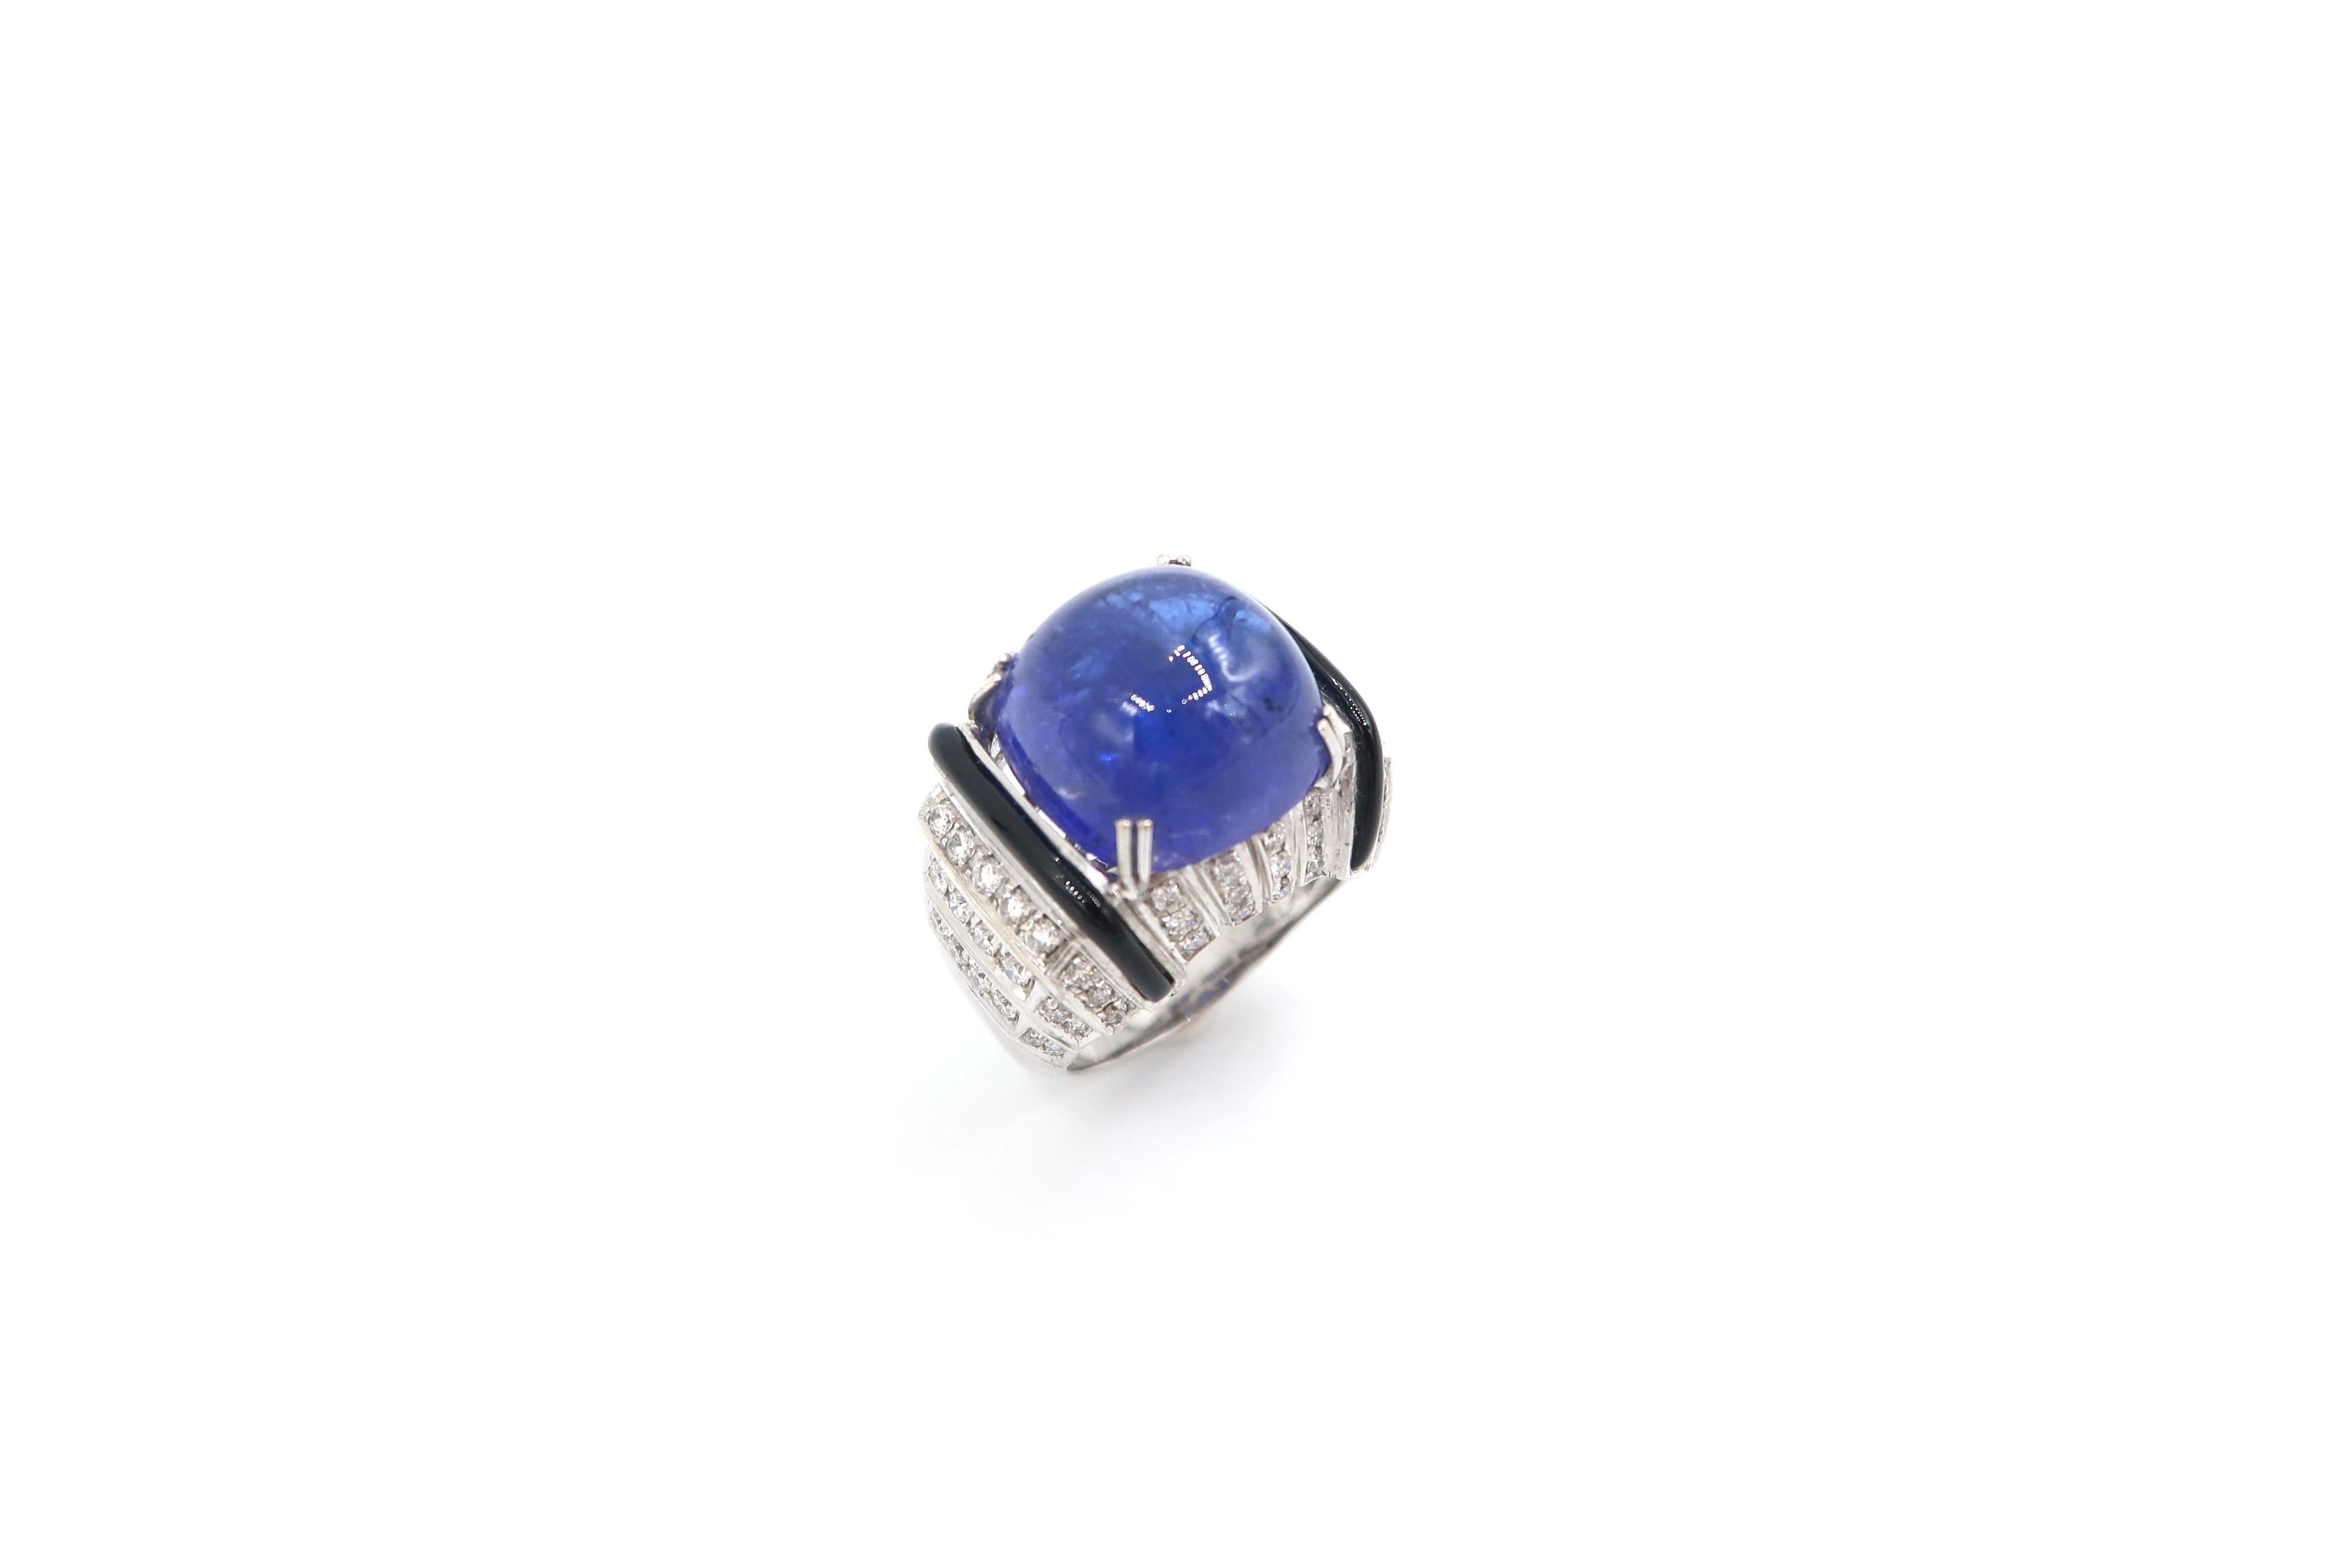 Art Deco Inspired 18.85 Carat Cabochon Tanzanite Ring embellished with Onyx and Diamond in 18K White Gold Setting

Should you wish to have the ring resized, please kindly let us know upon checkout.

Size : US7, N

Tanzanite : Cabochon 18.85cts.
Gold